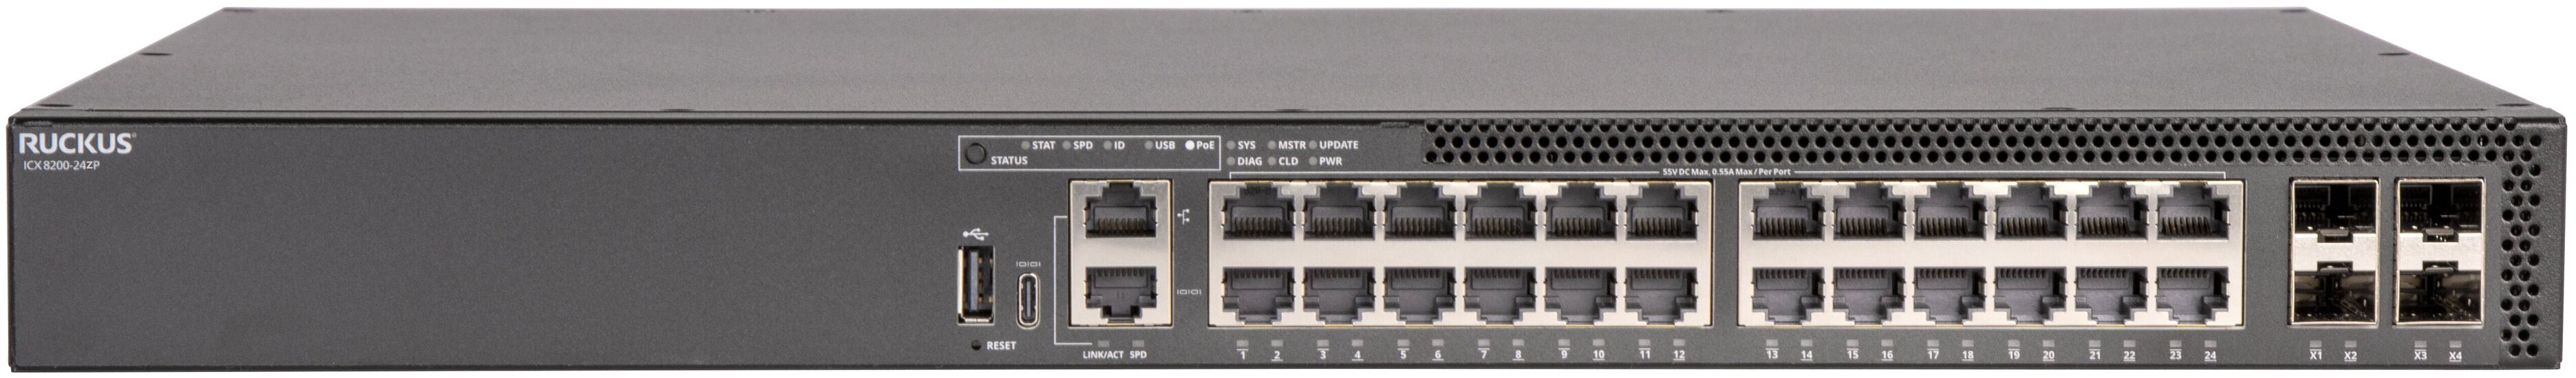 RUCKUS_ICX_8200_Switch_24x100_1000_2500_Mbps_PoE_p-preview